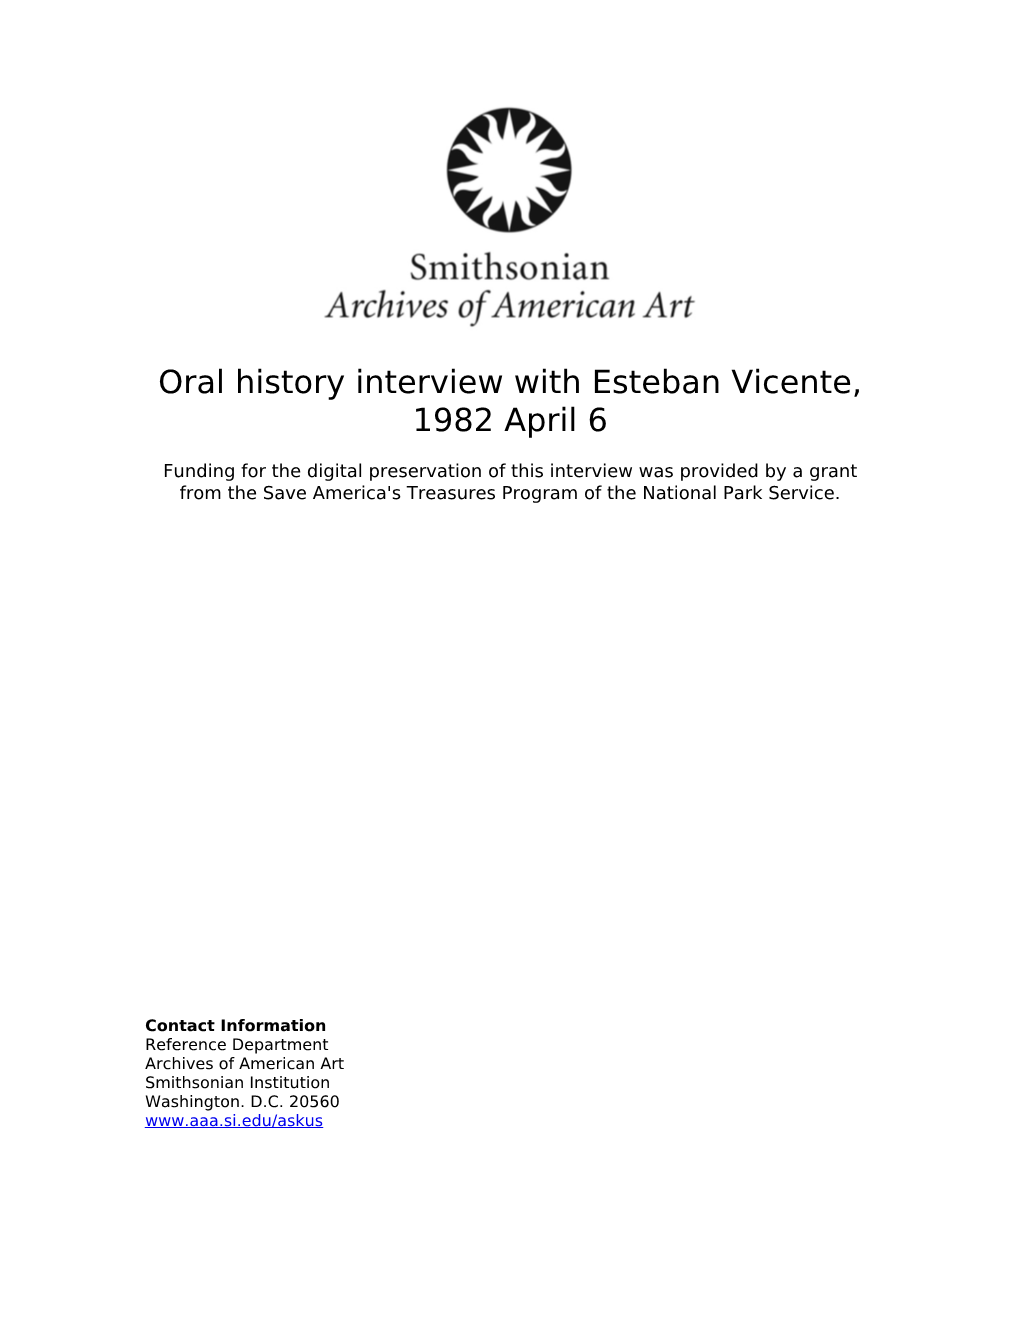 Oral History Interview with Esteban Vicente, 1982 April 6